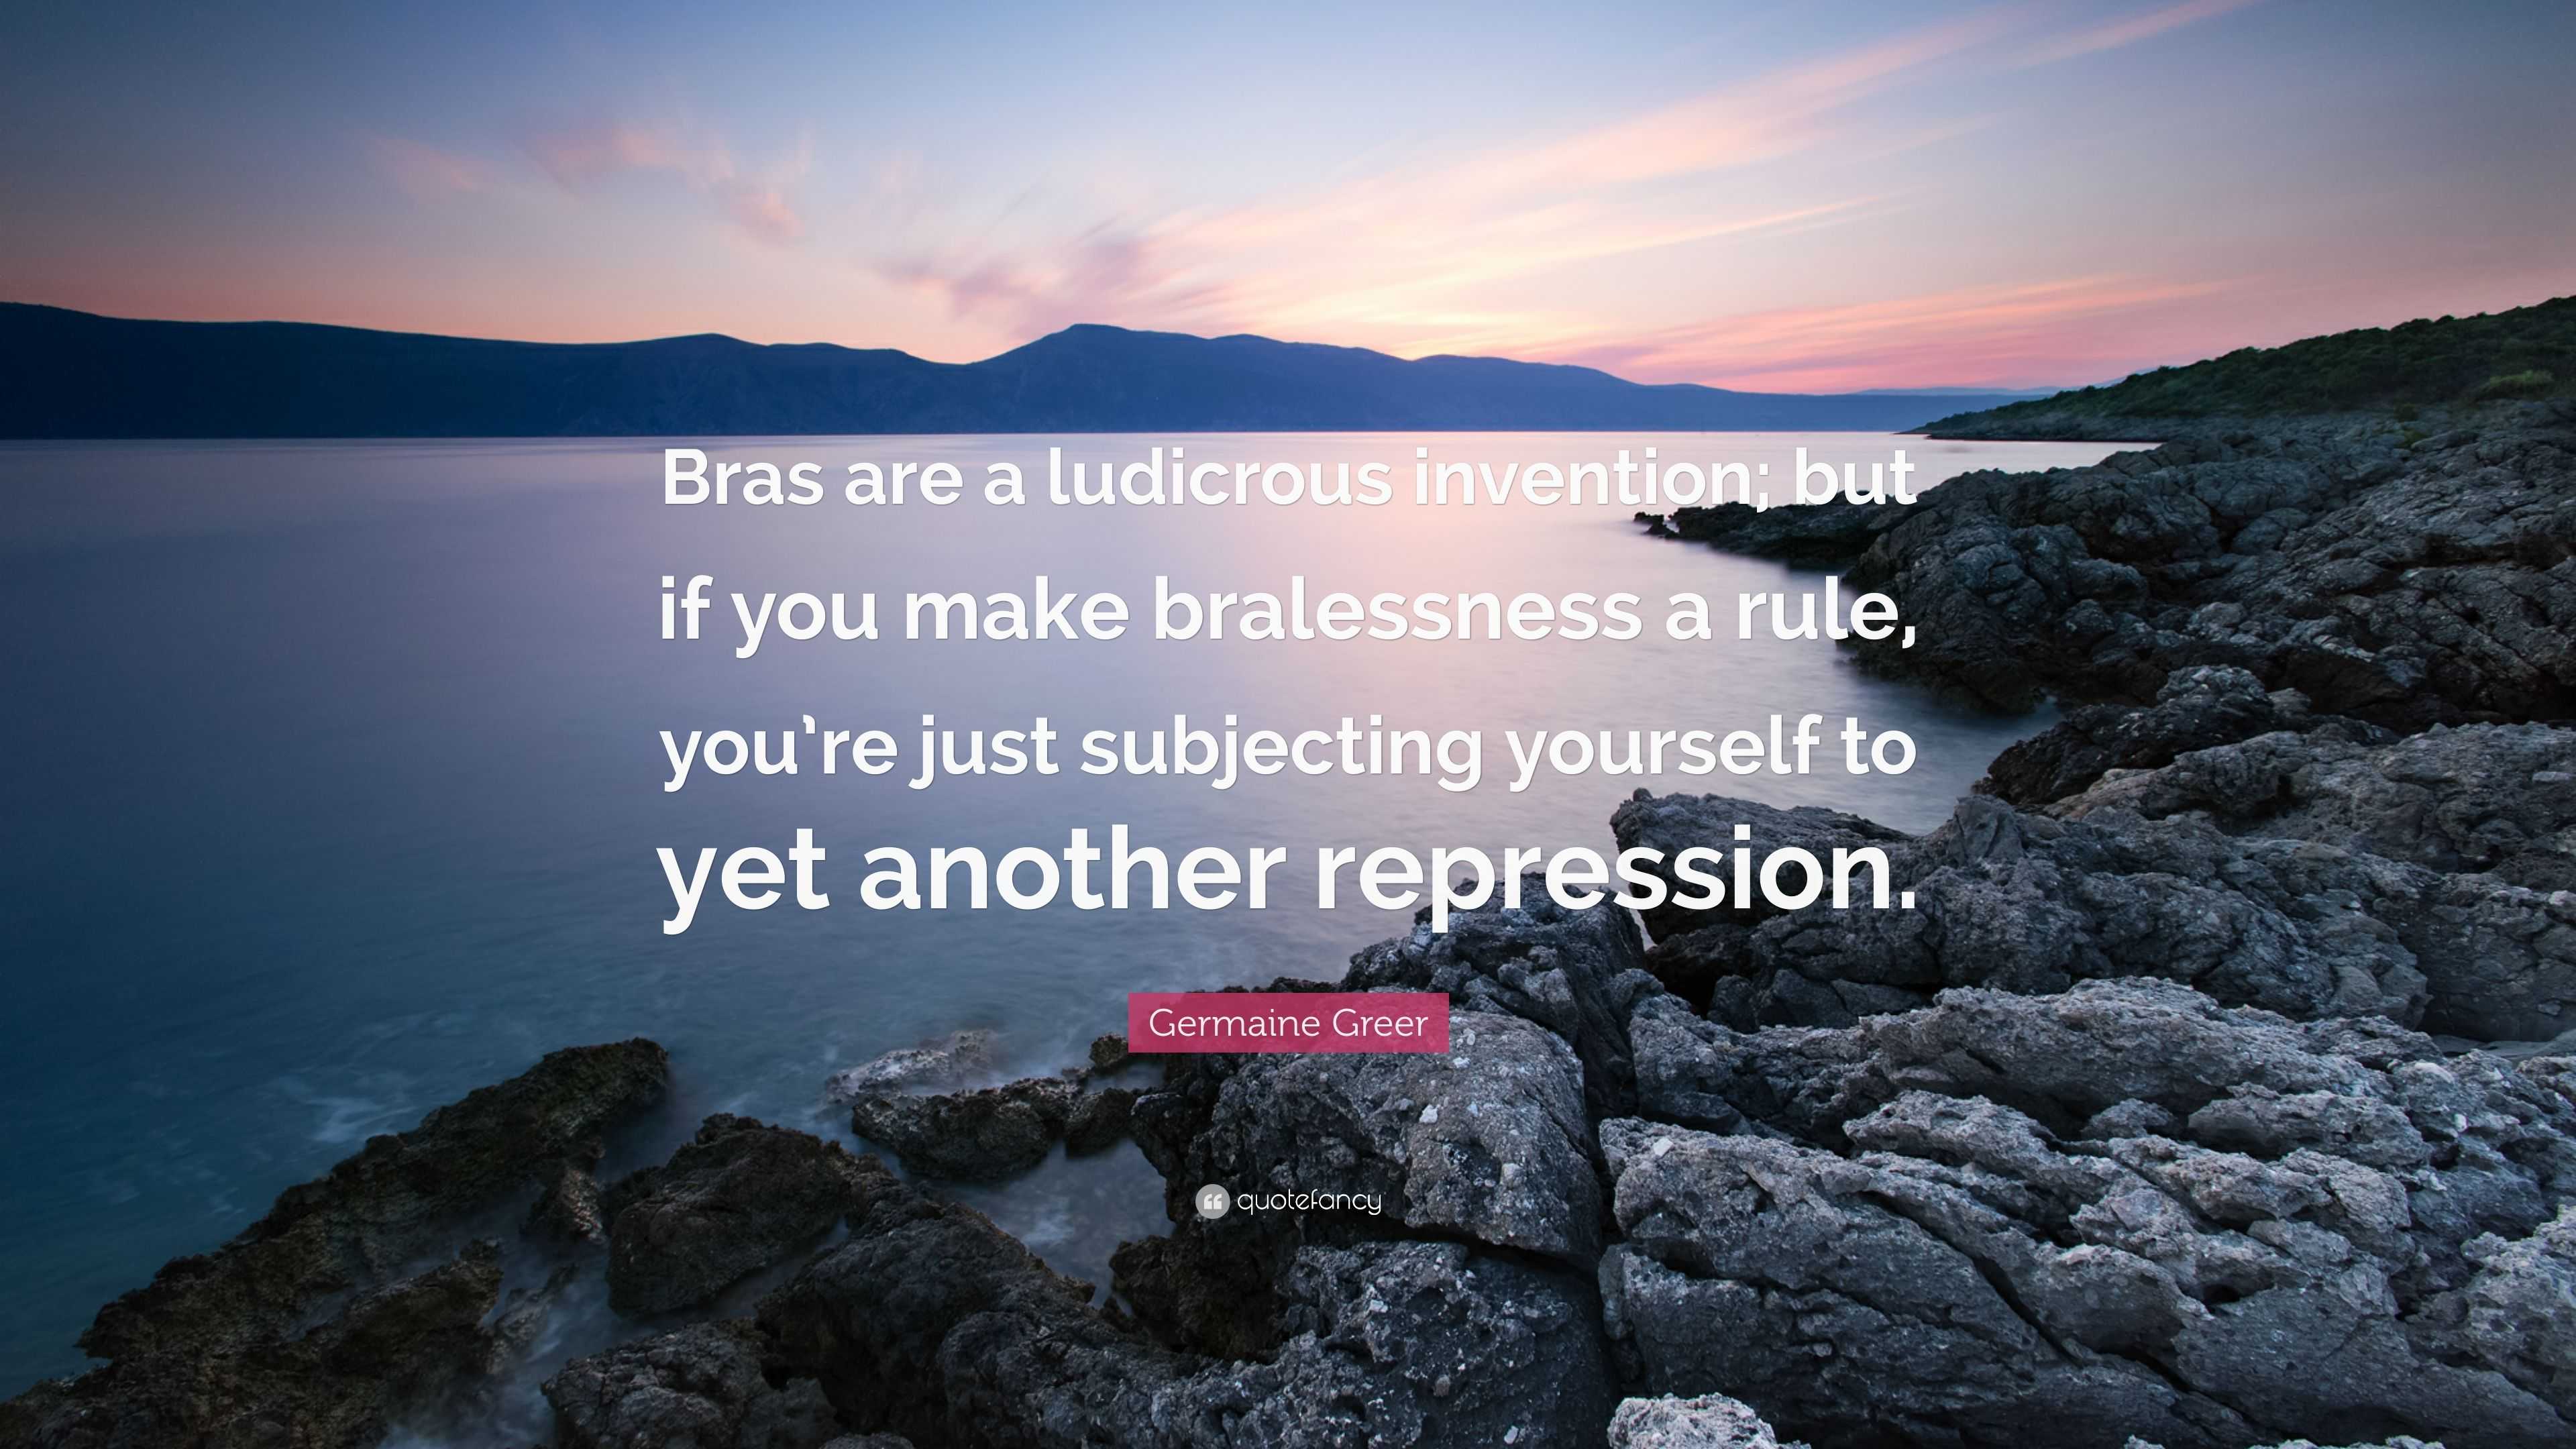 https://quotefancy.com/media/wallpaper/3840x2160/4161331-Germaine-Greer-Quote-Bras-are-a-ludicrous-invention-but-if-you.jpg